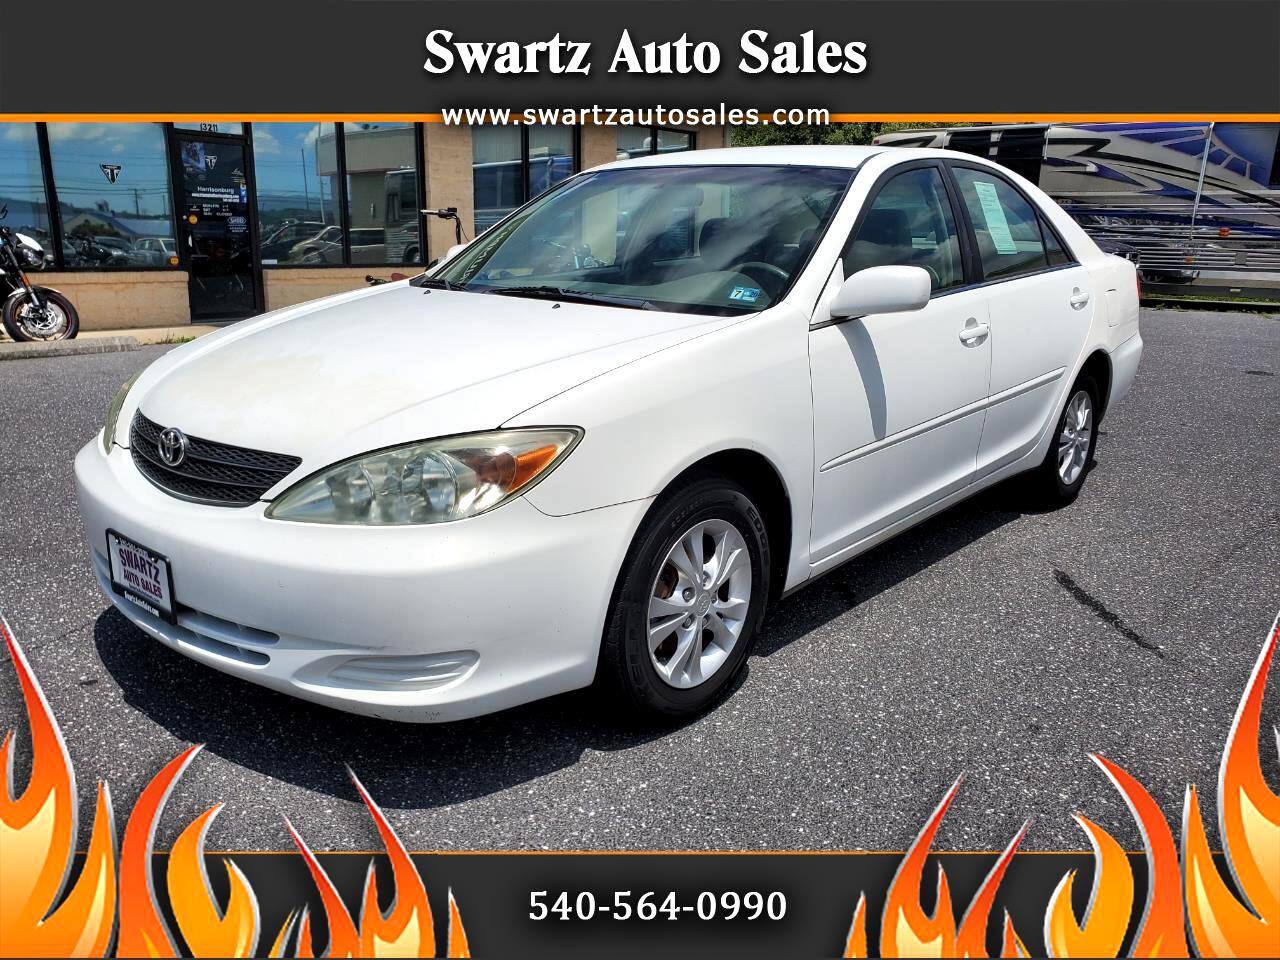 Used 2004 Toyota Camry 4dr Sdn LE V6 Auto (Natl) for Sale in